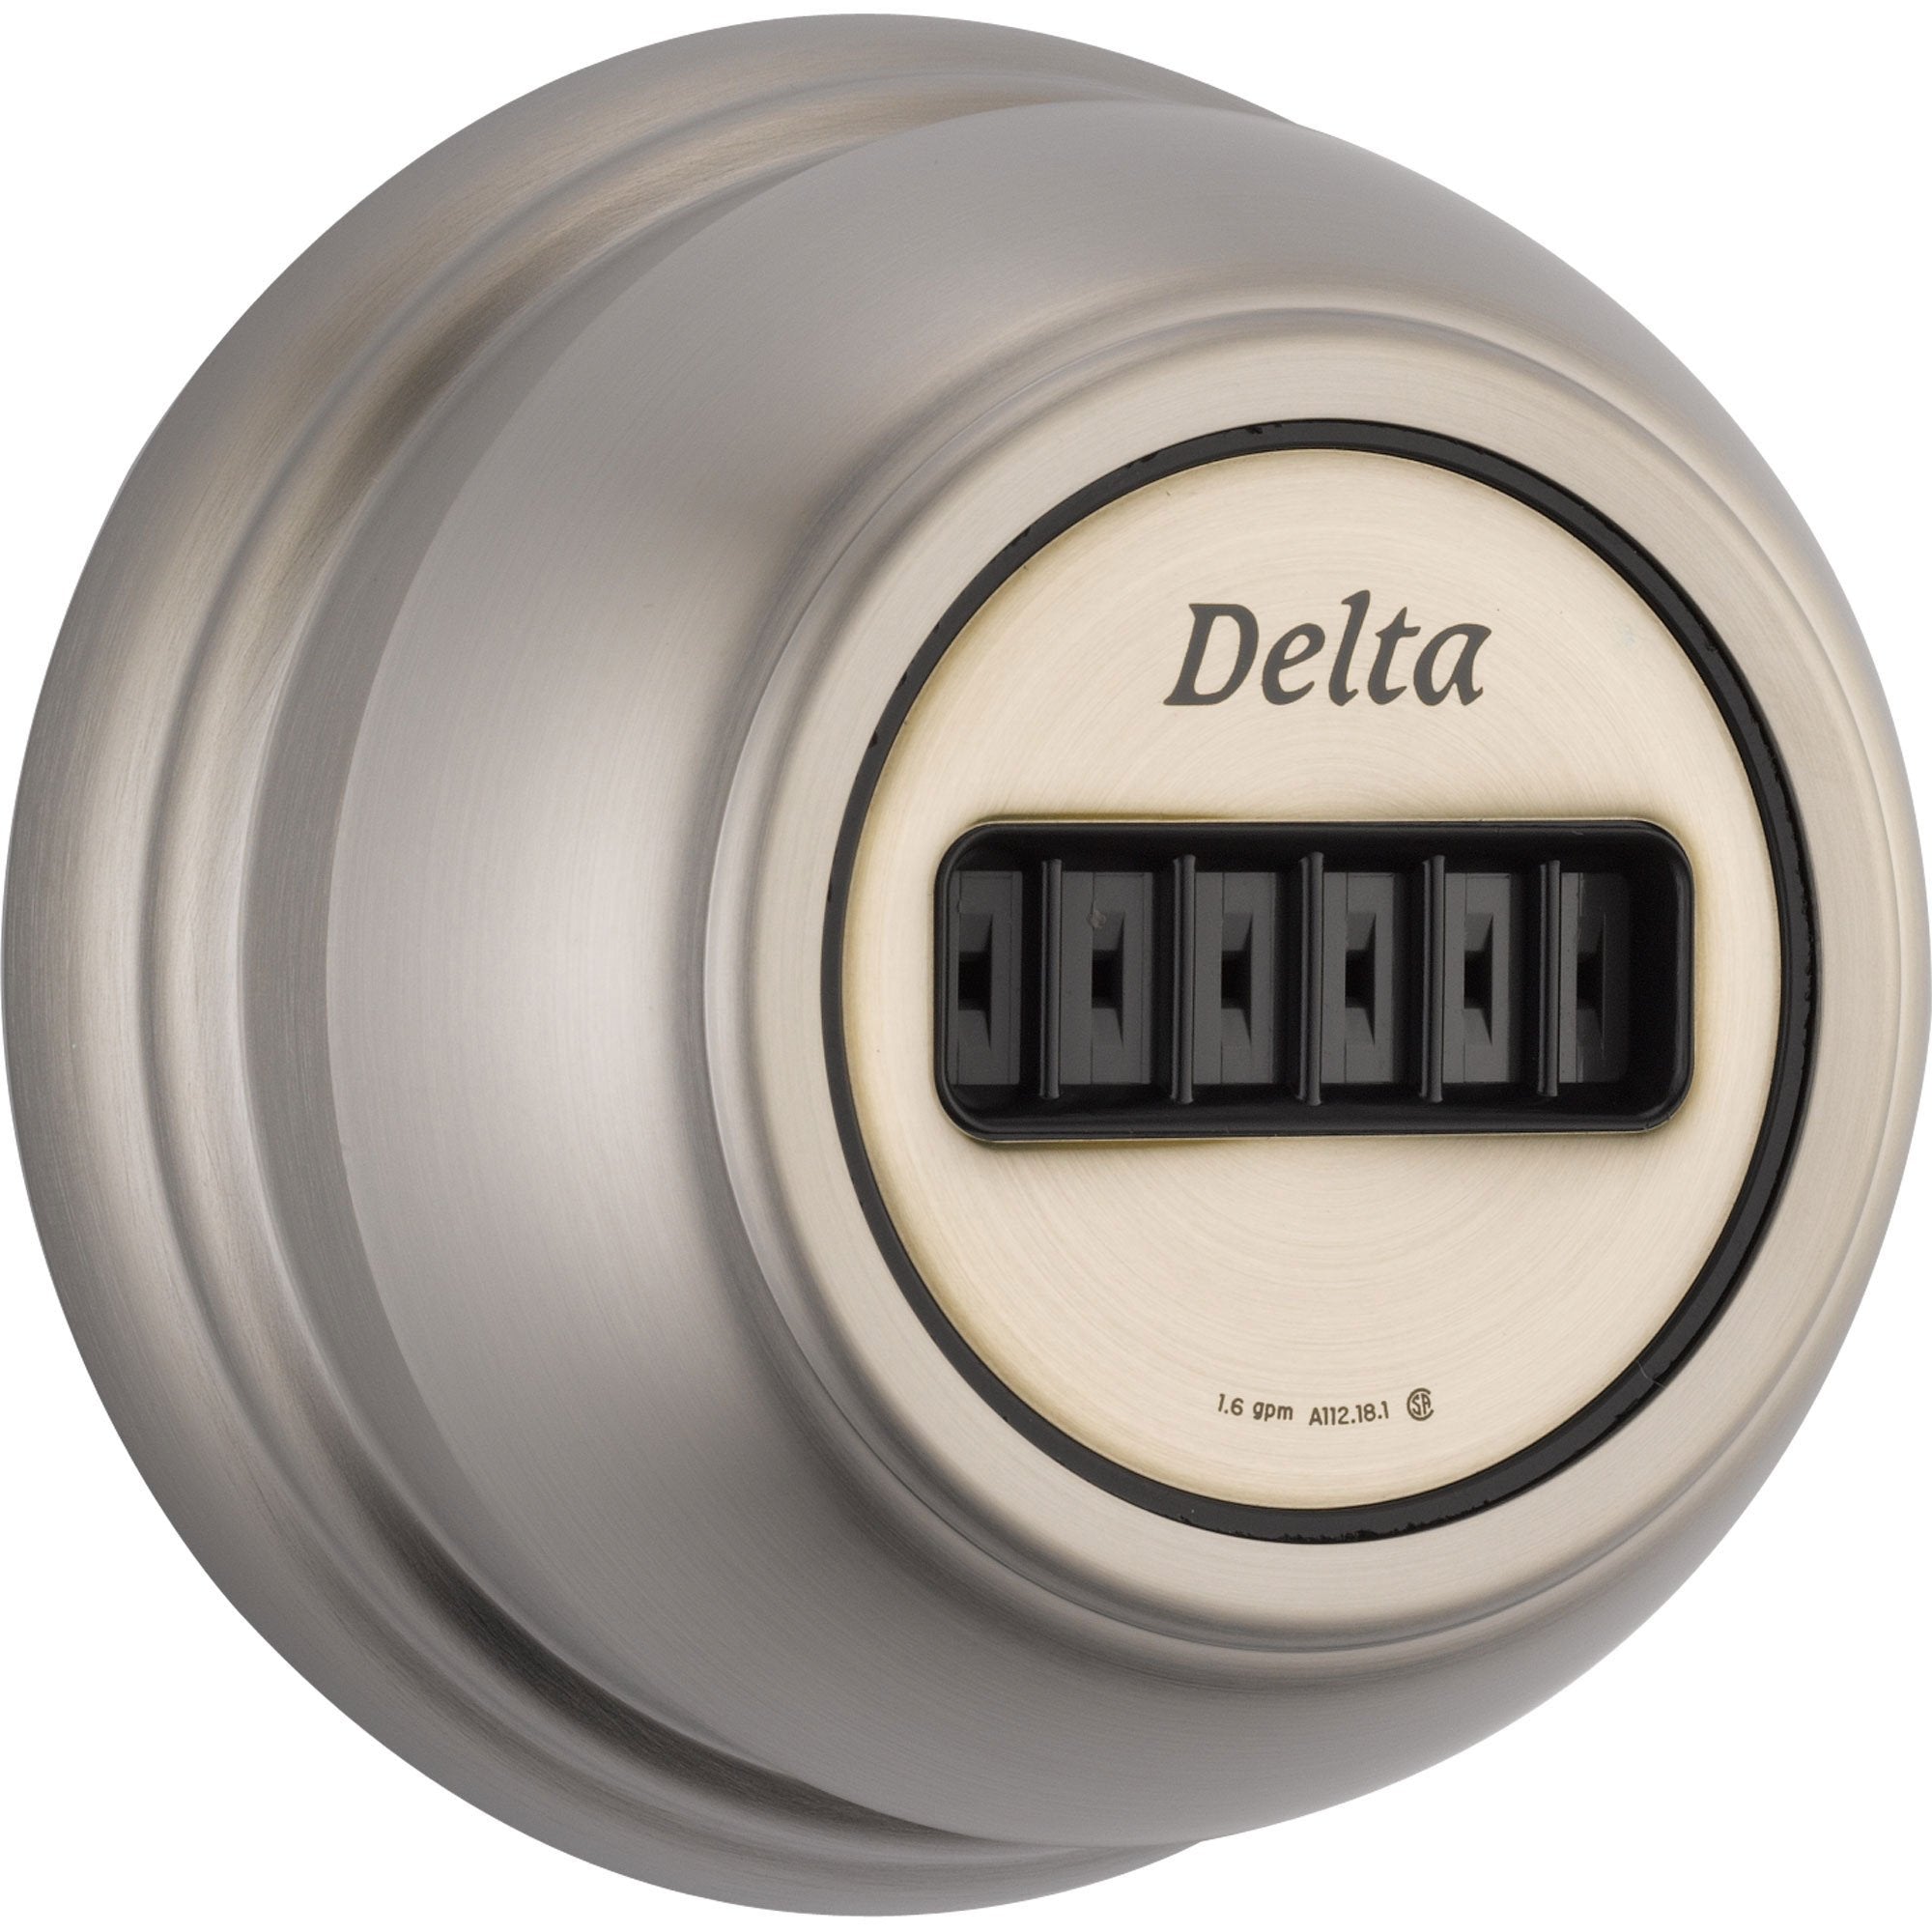 Delta Classic H2Okinetic Stainless Steel Finish Body Spray with Valve D955V